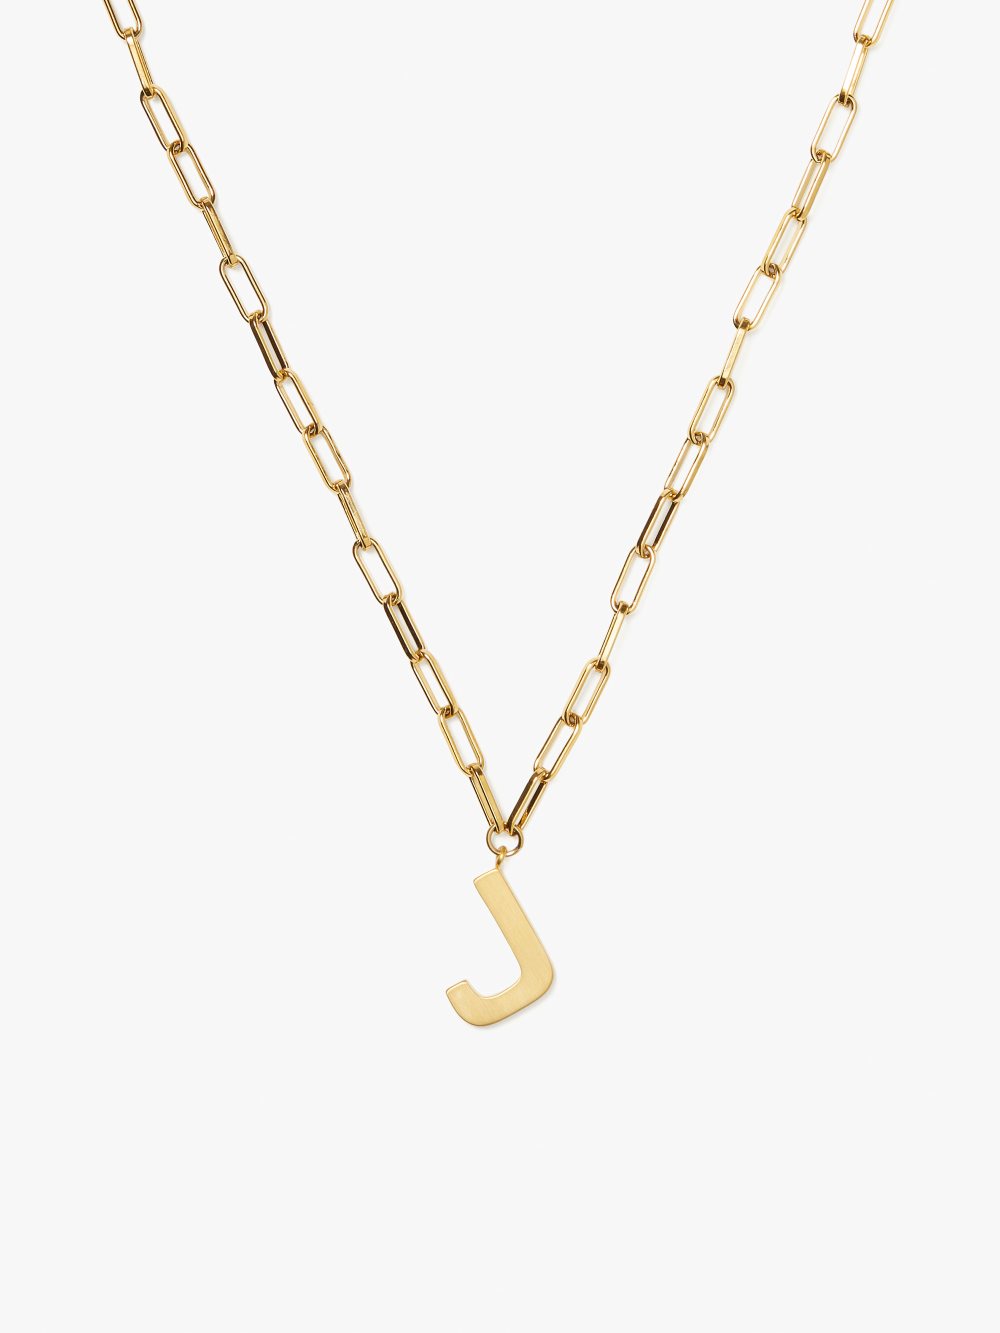 Women's gold. initial this pendant | Kate Spade